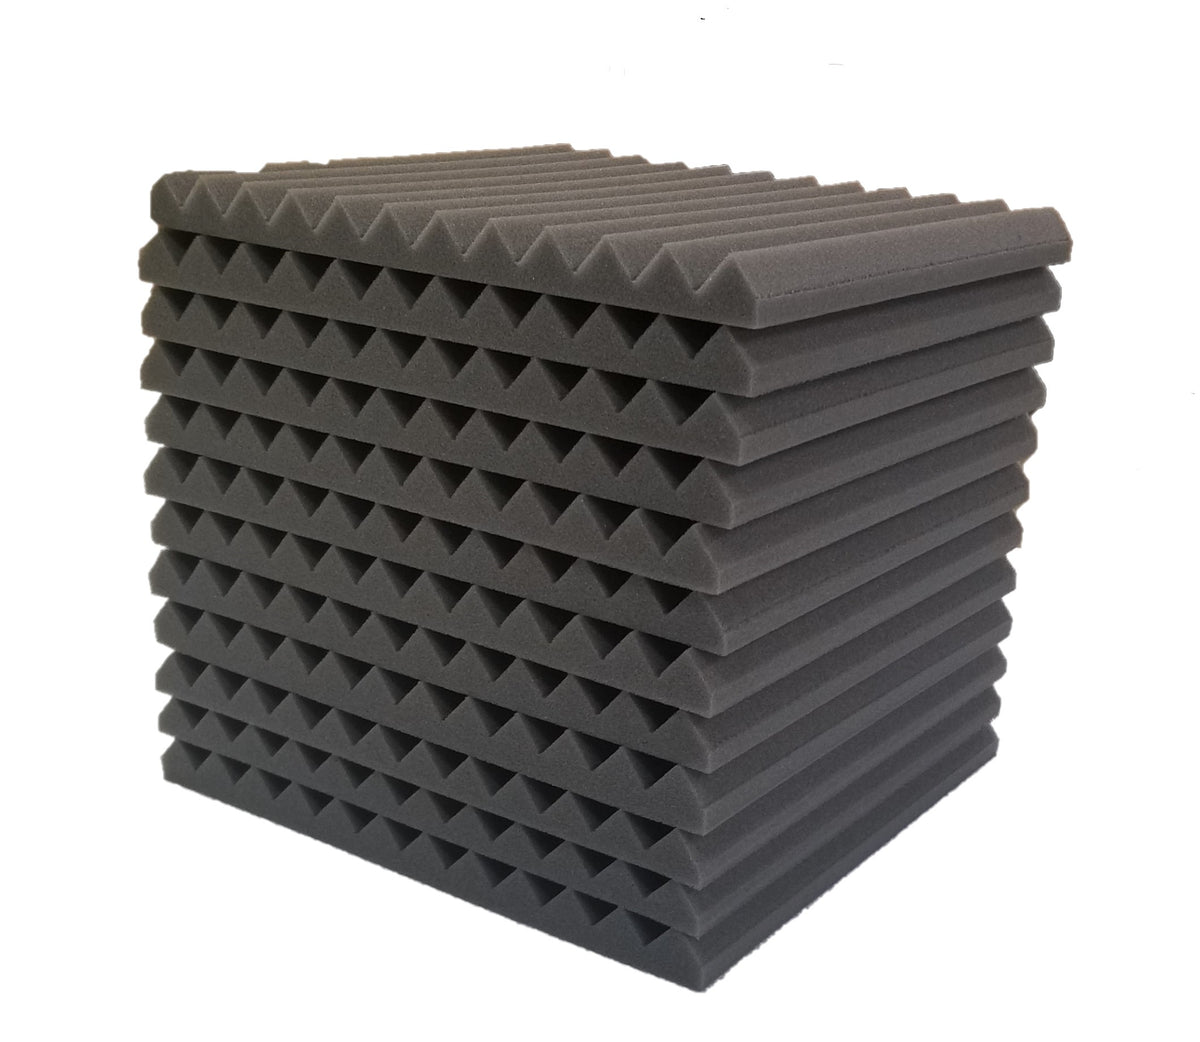 96 Pack 1 inch Acoustic Foam Panels Tiles Wall Record Studio Soundproo